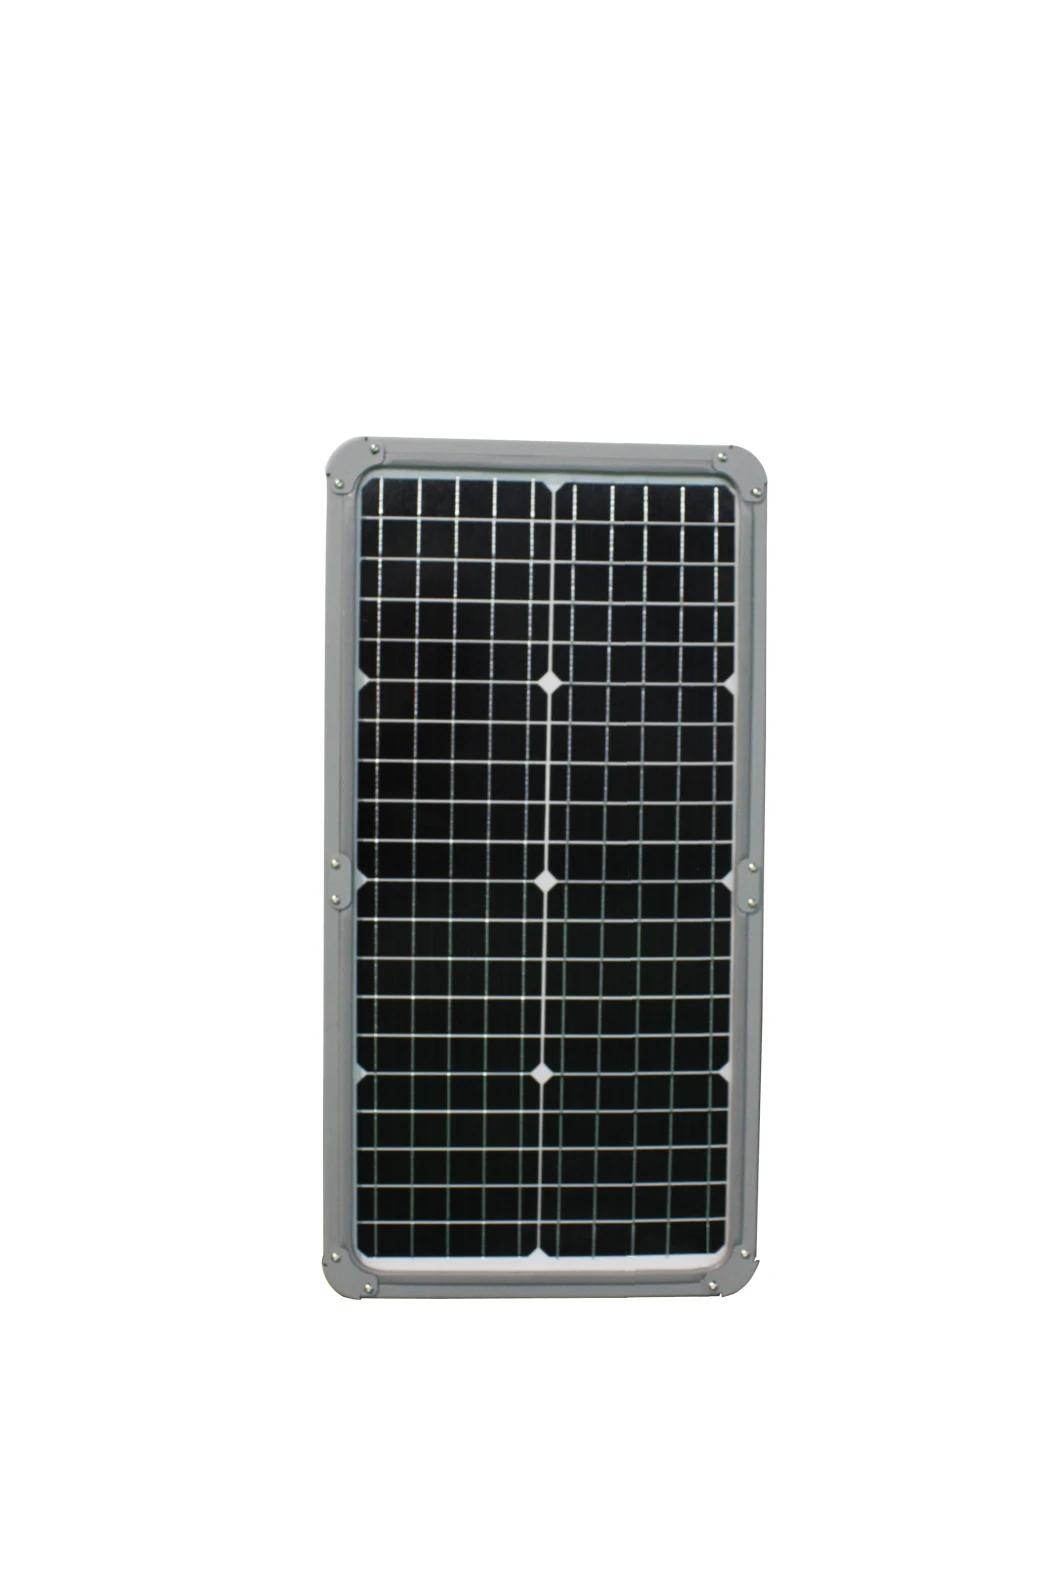 China Manufacturer High Power 100W All in One Integrated Solar LED Street Light